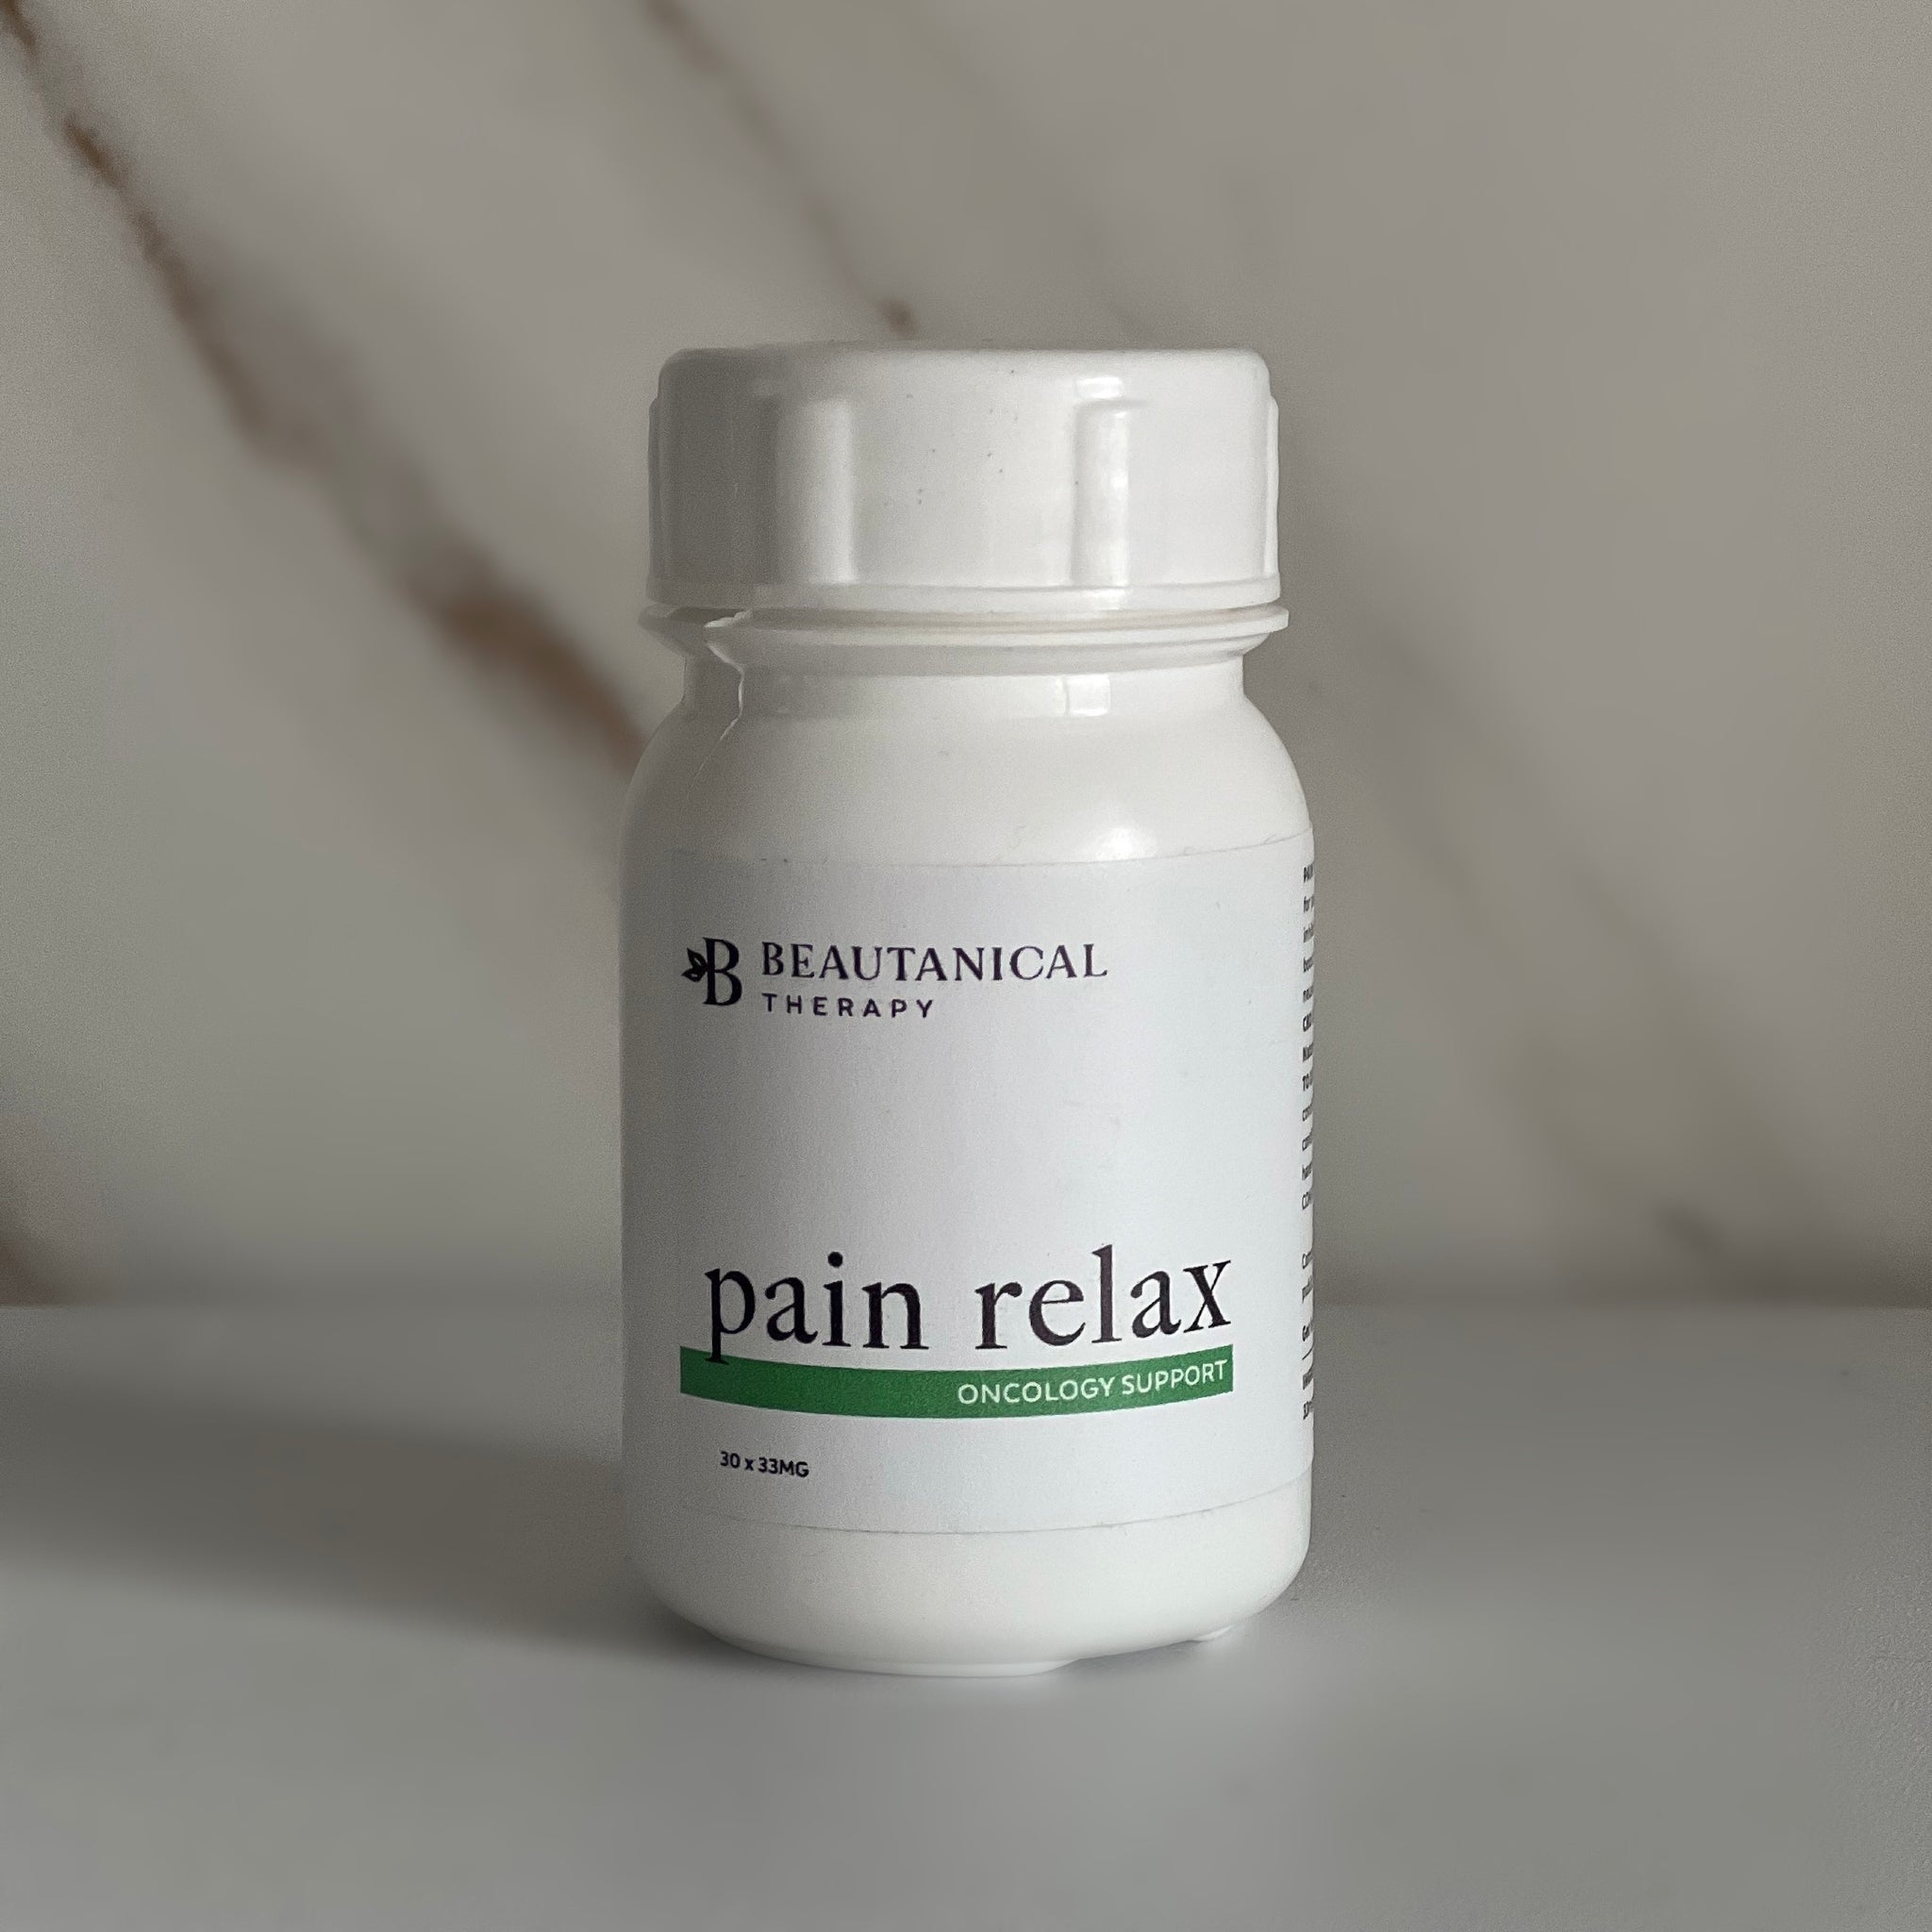 Pain Relax - Oncology